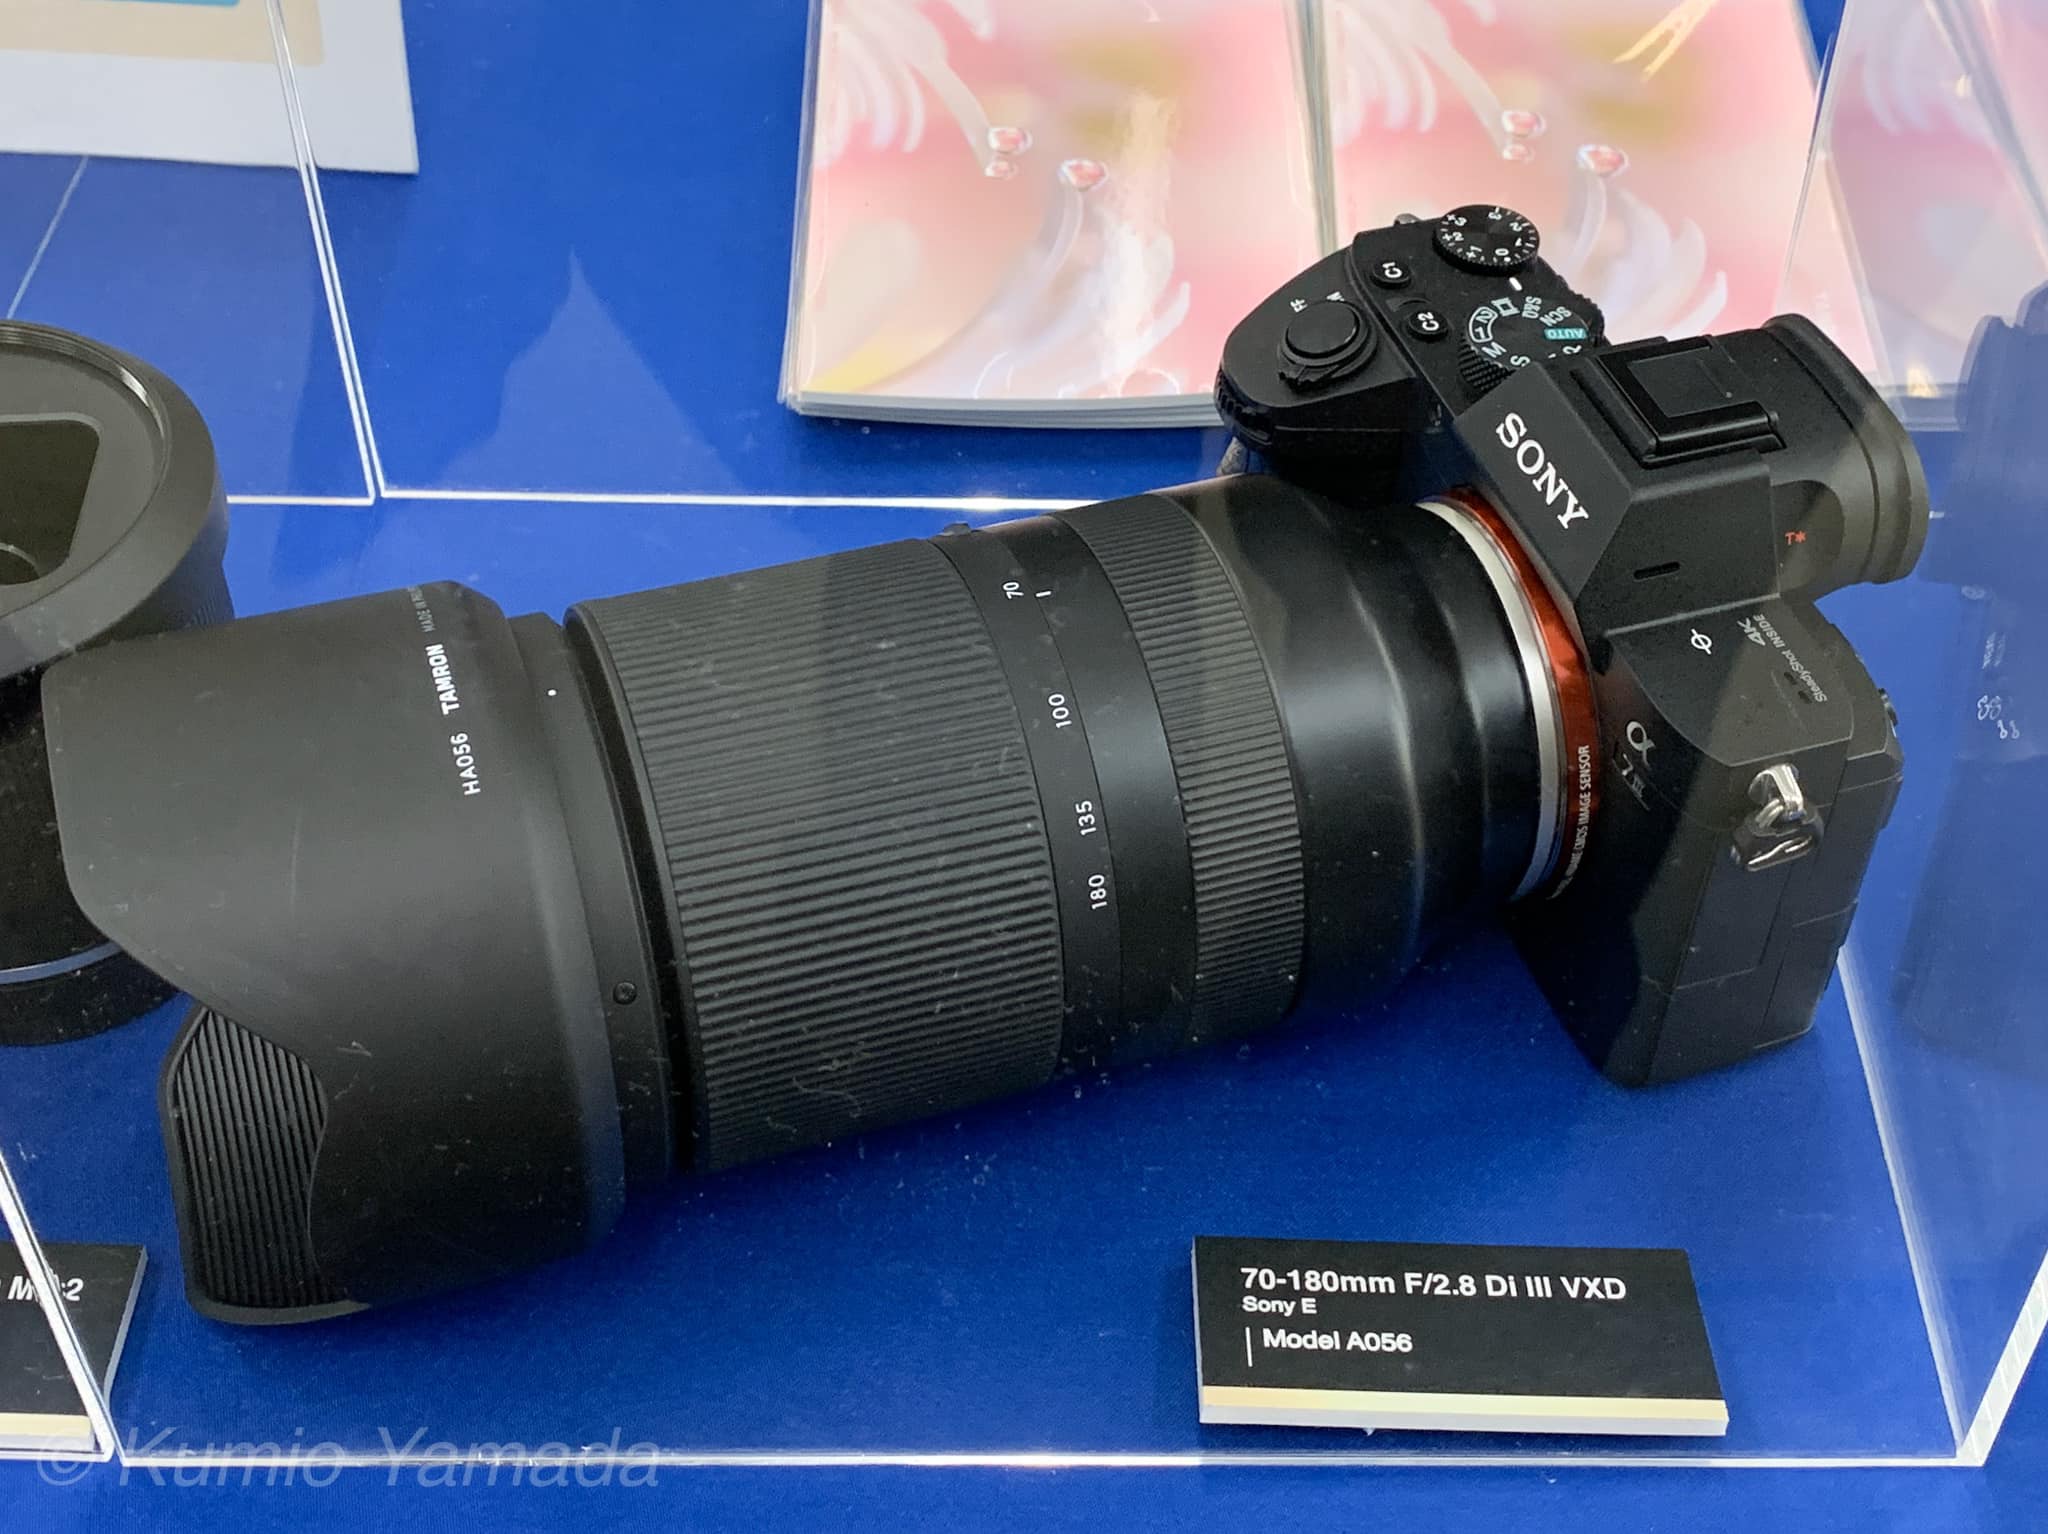 RUMOR: First test suggest the Tamron 70-180mm FE is sharper than the Sony 70-200mm  GM lens! - sonyalpharumors